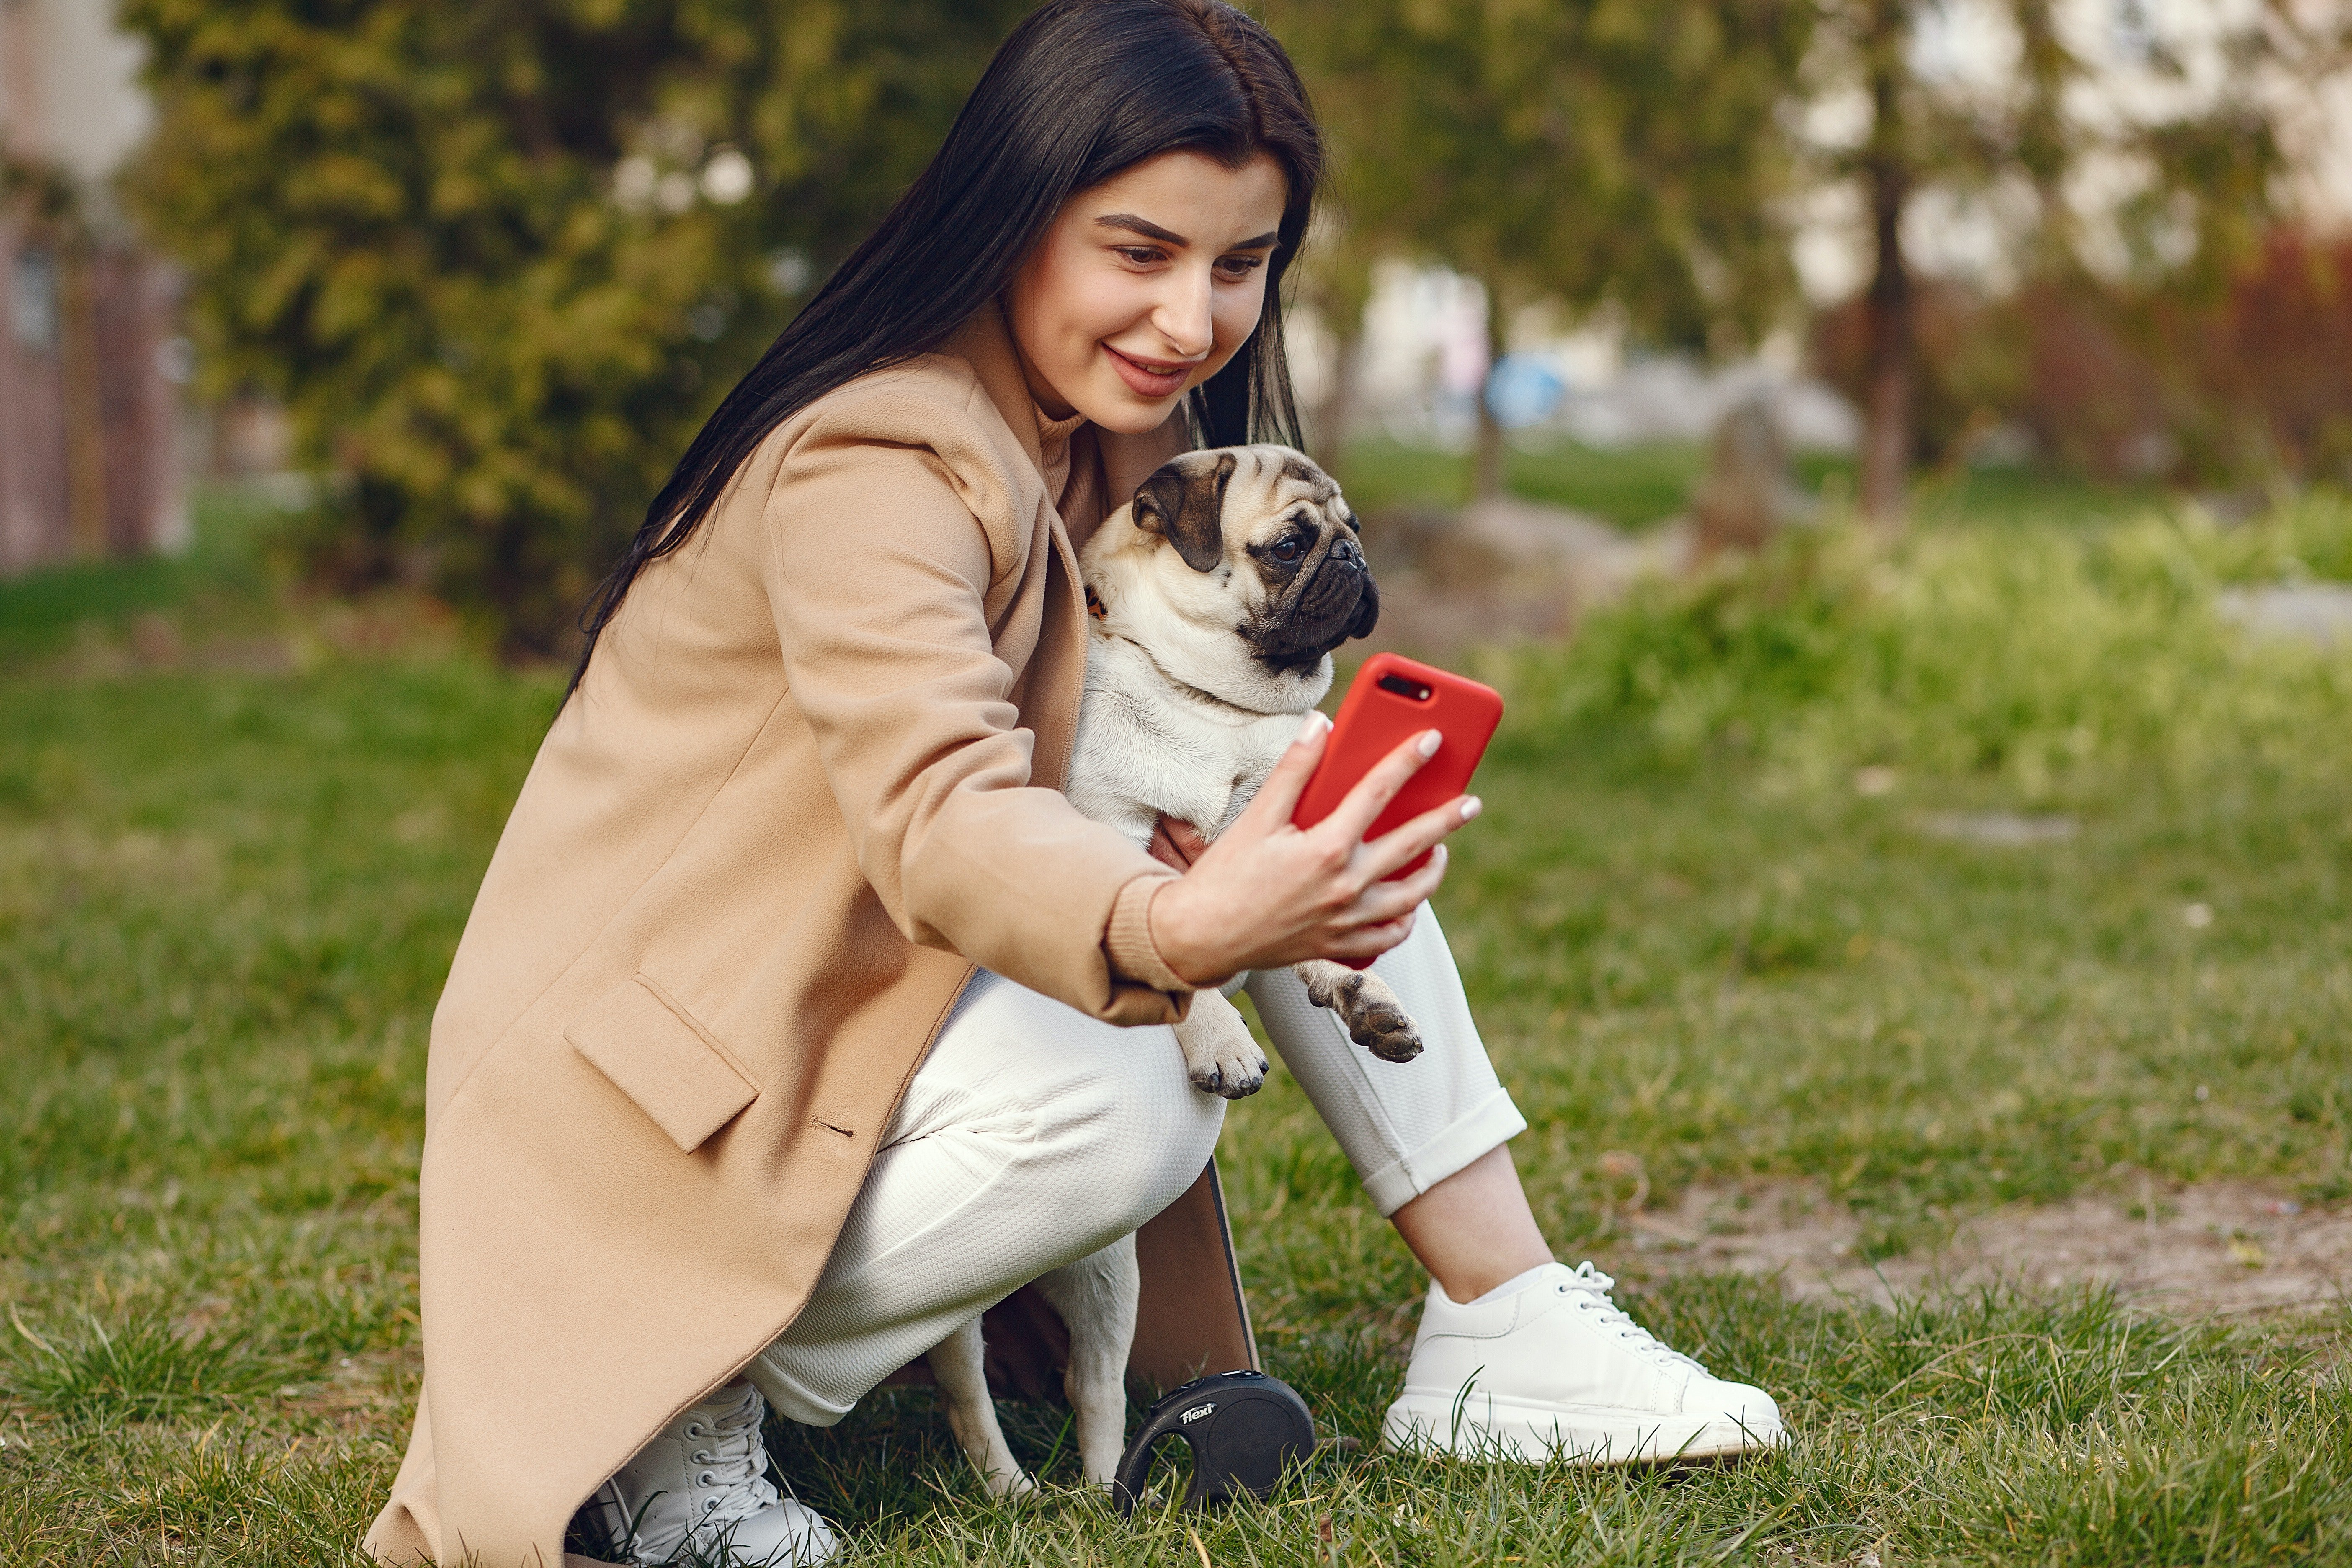 The pug loved the man's wife! | Photo: Pexels